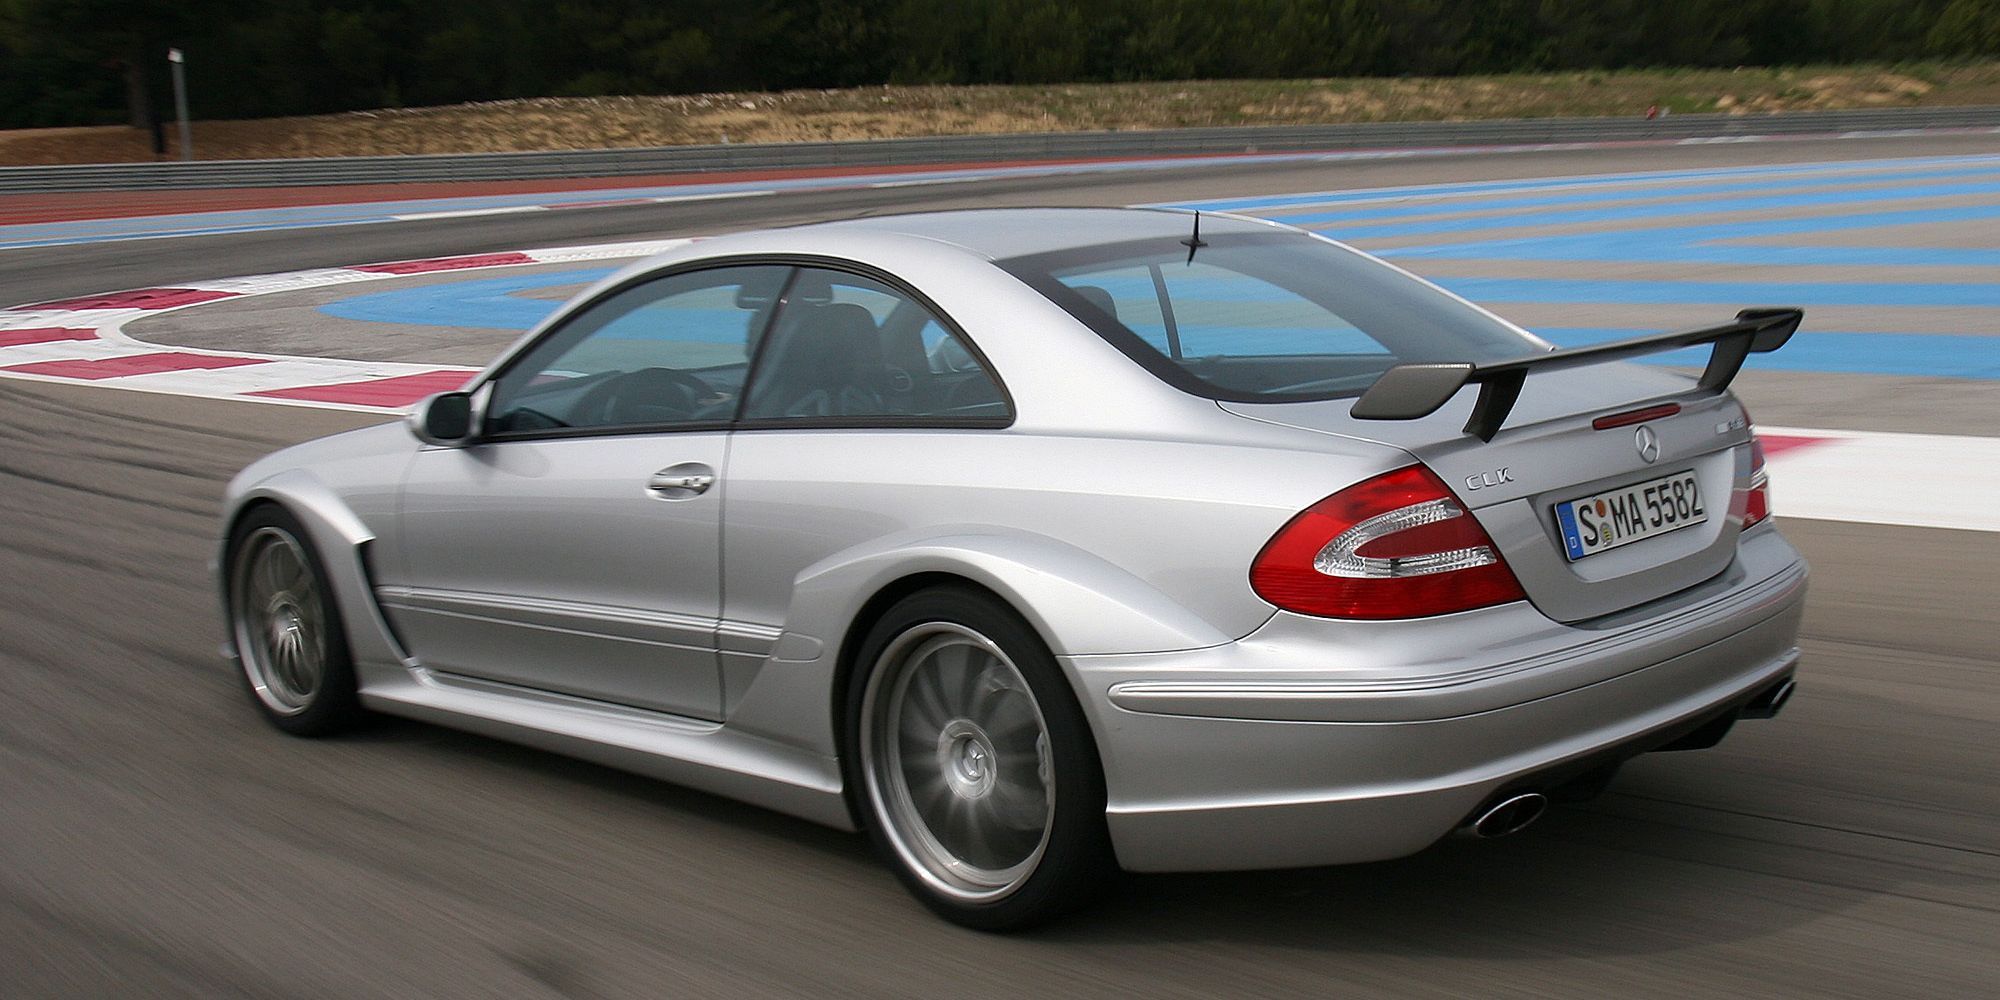 Rear 3/4 view of the CLK AMG DTM on track